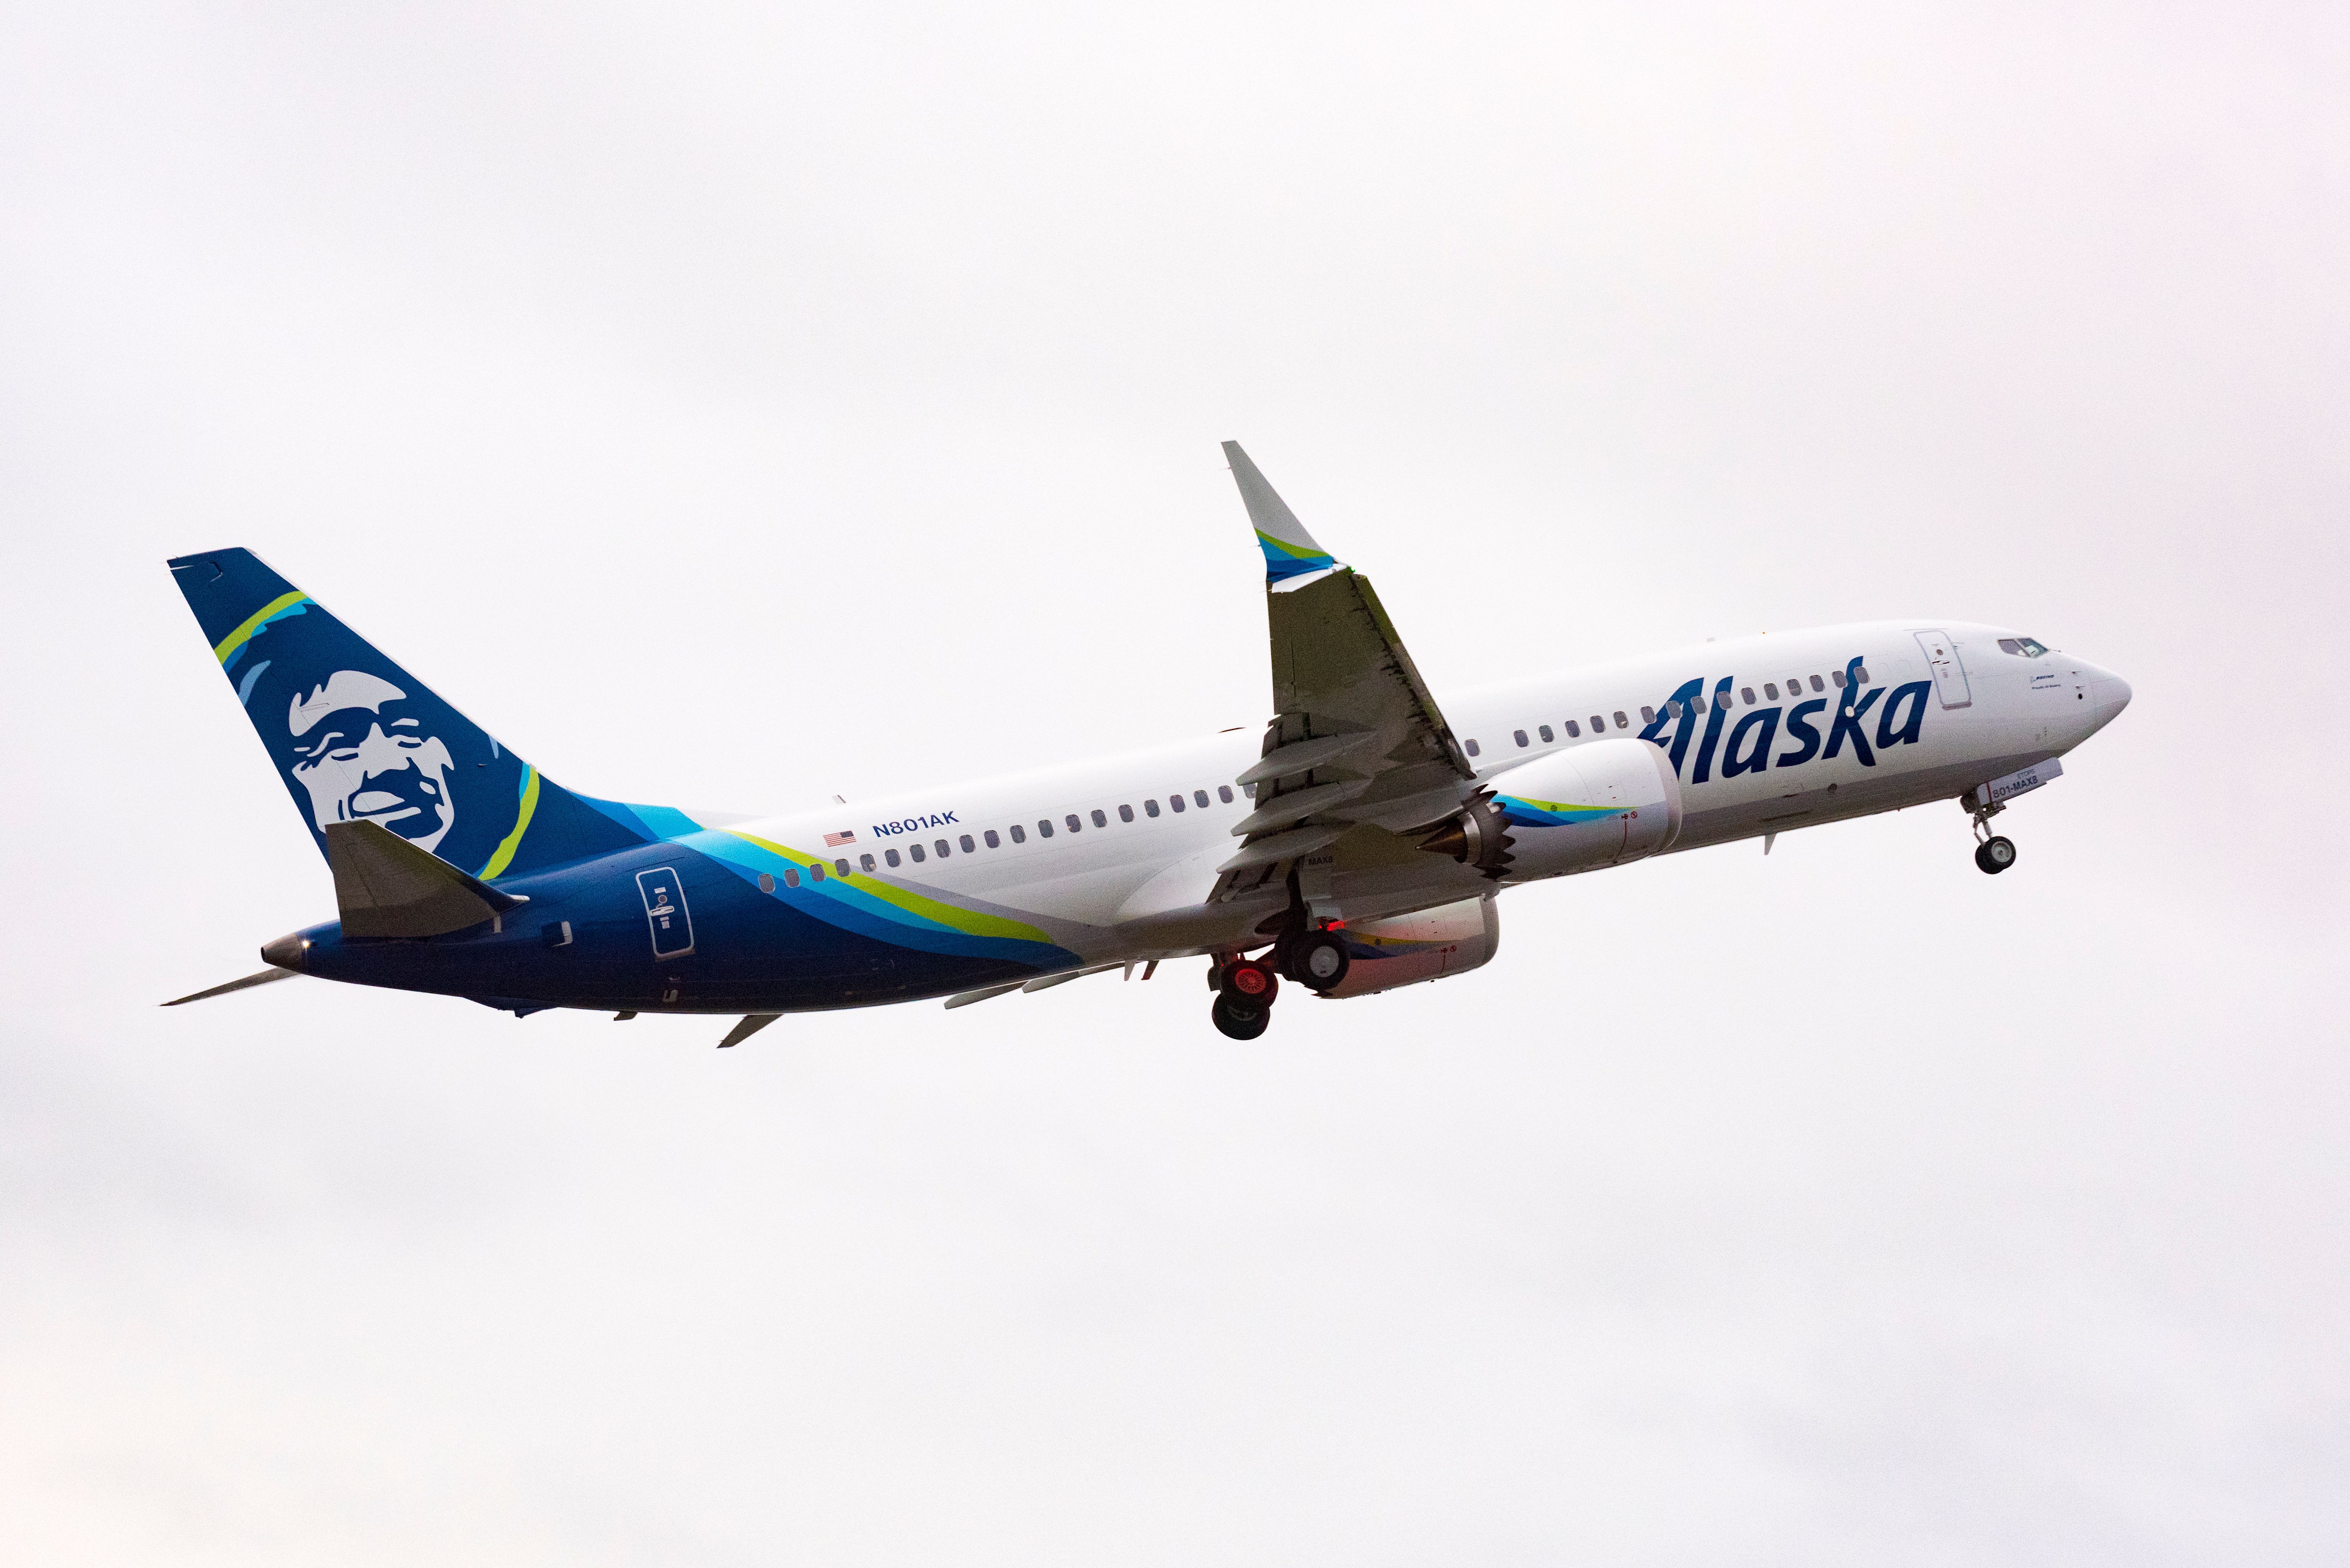 Alaska Airlines Boeing 737 MAX 8 taking off.